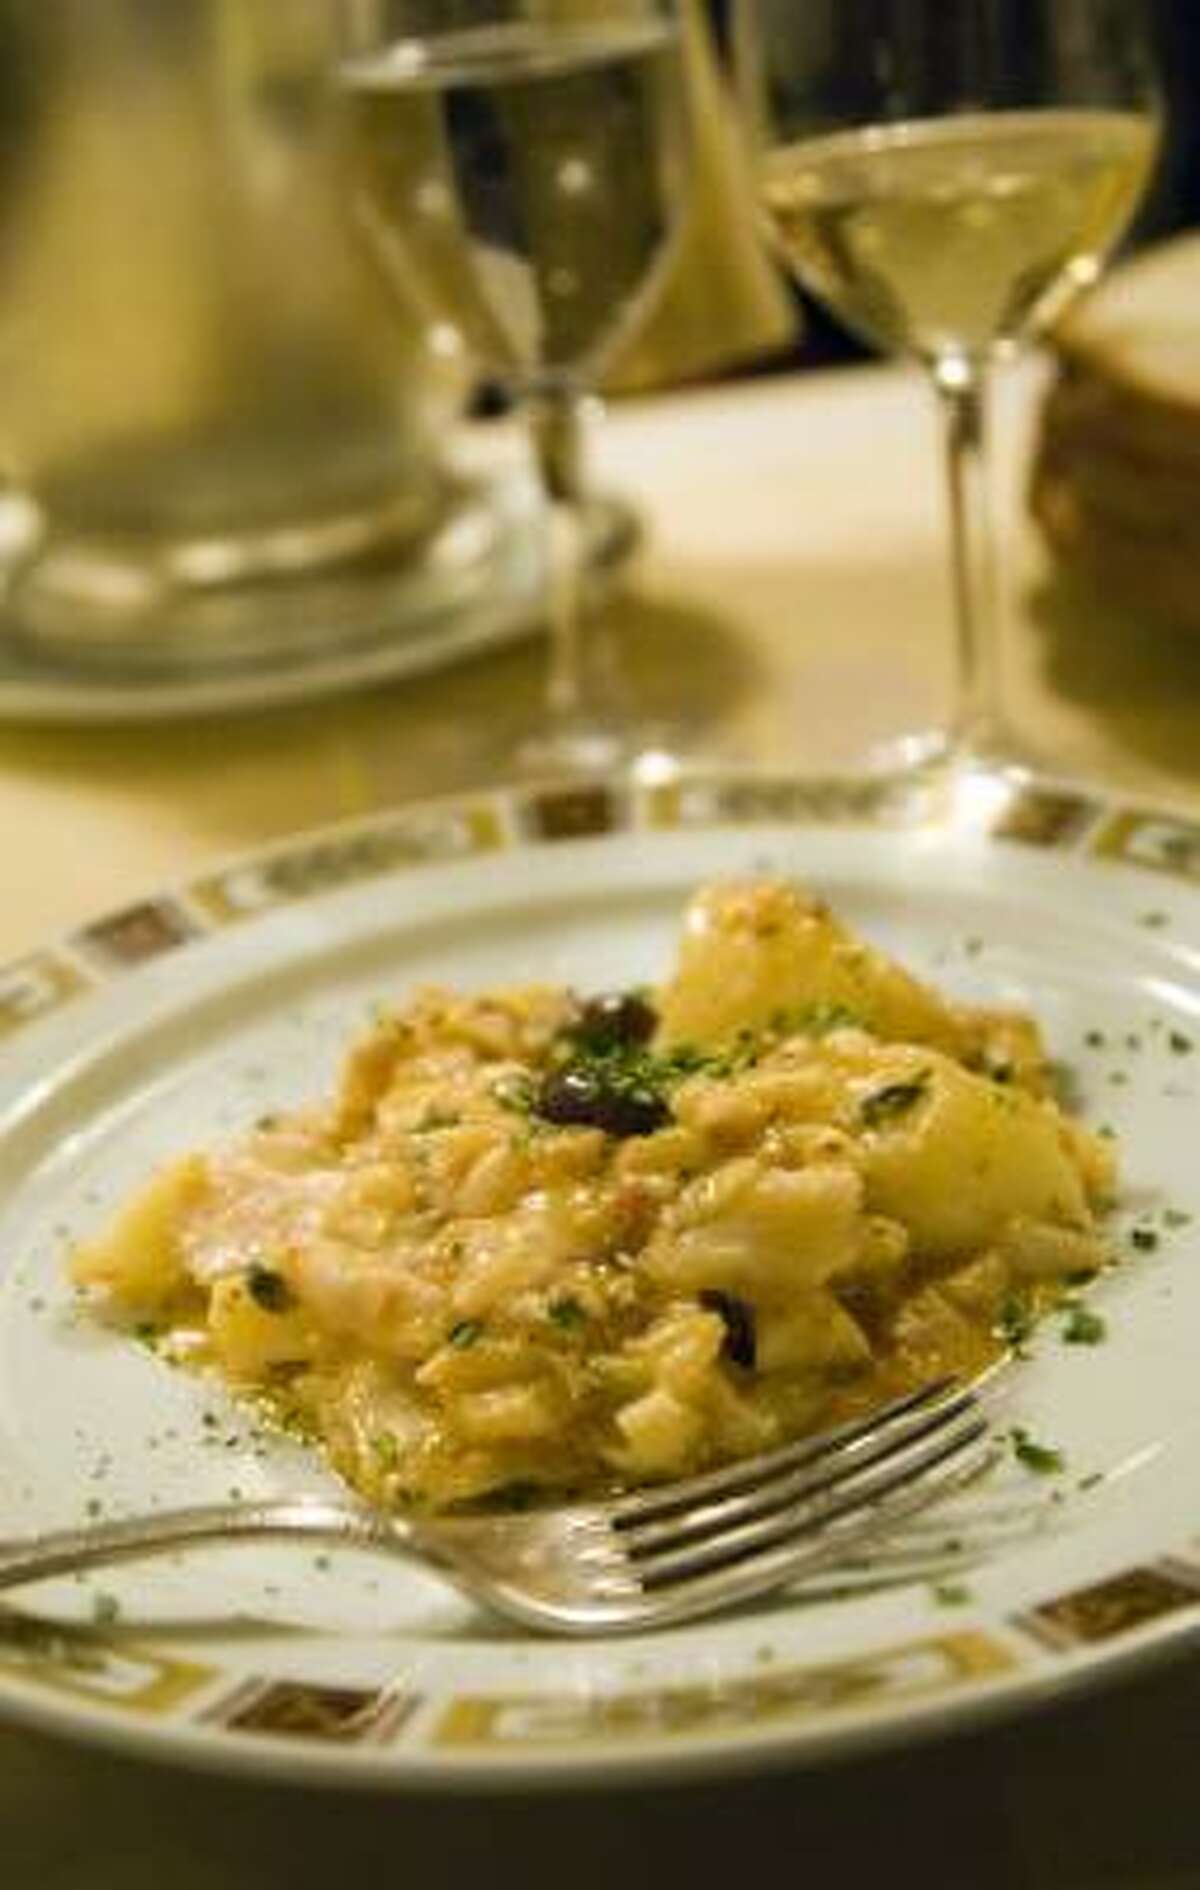 Traditional Genovese cuisine is a house specialty at Taverna Giulia.